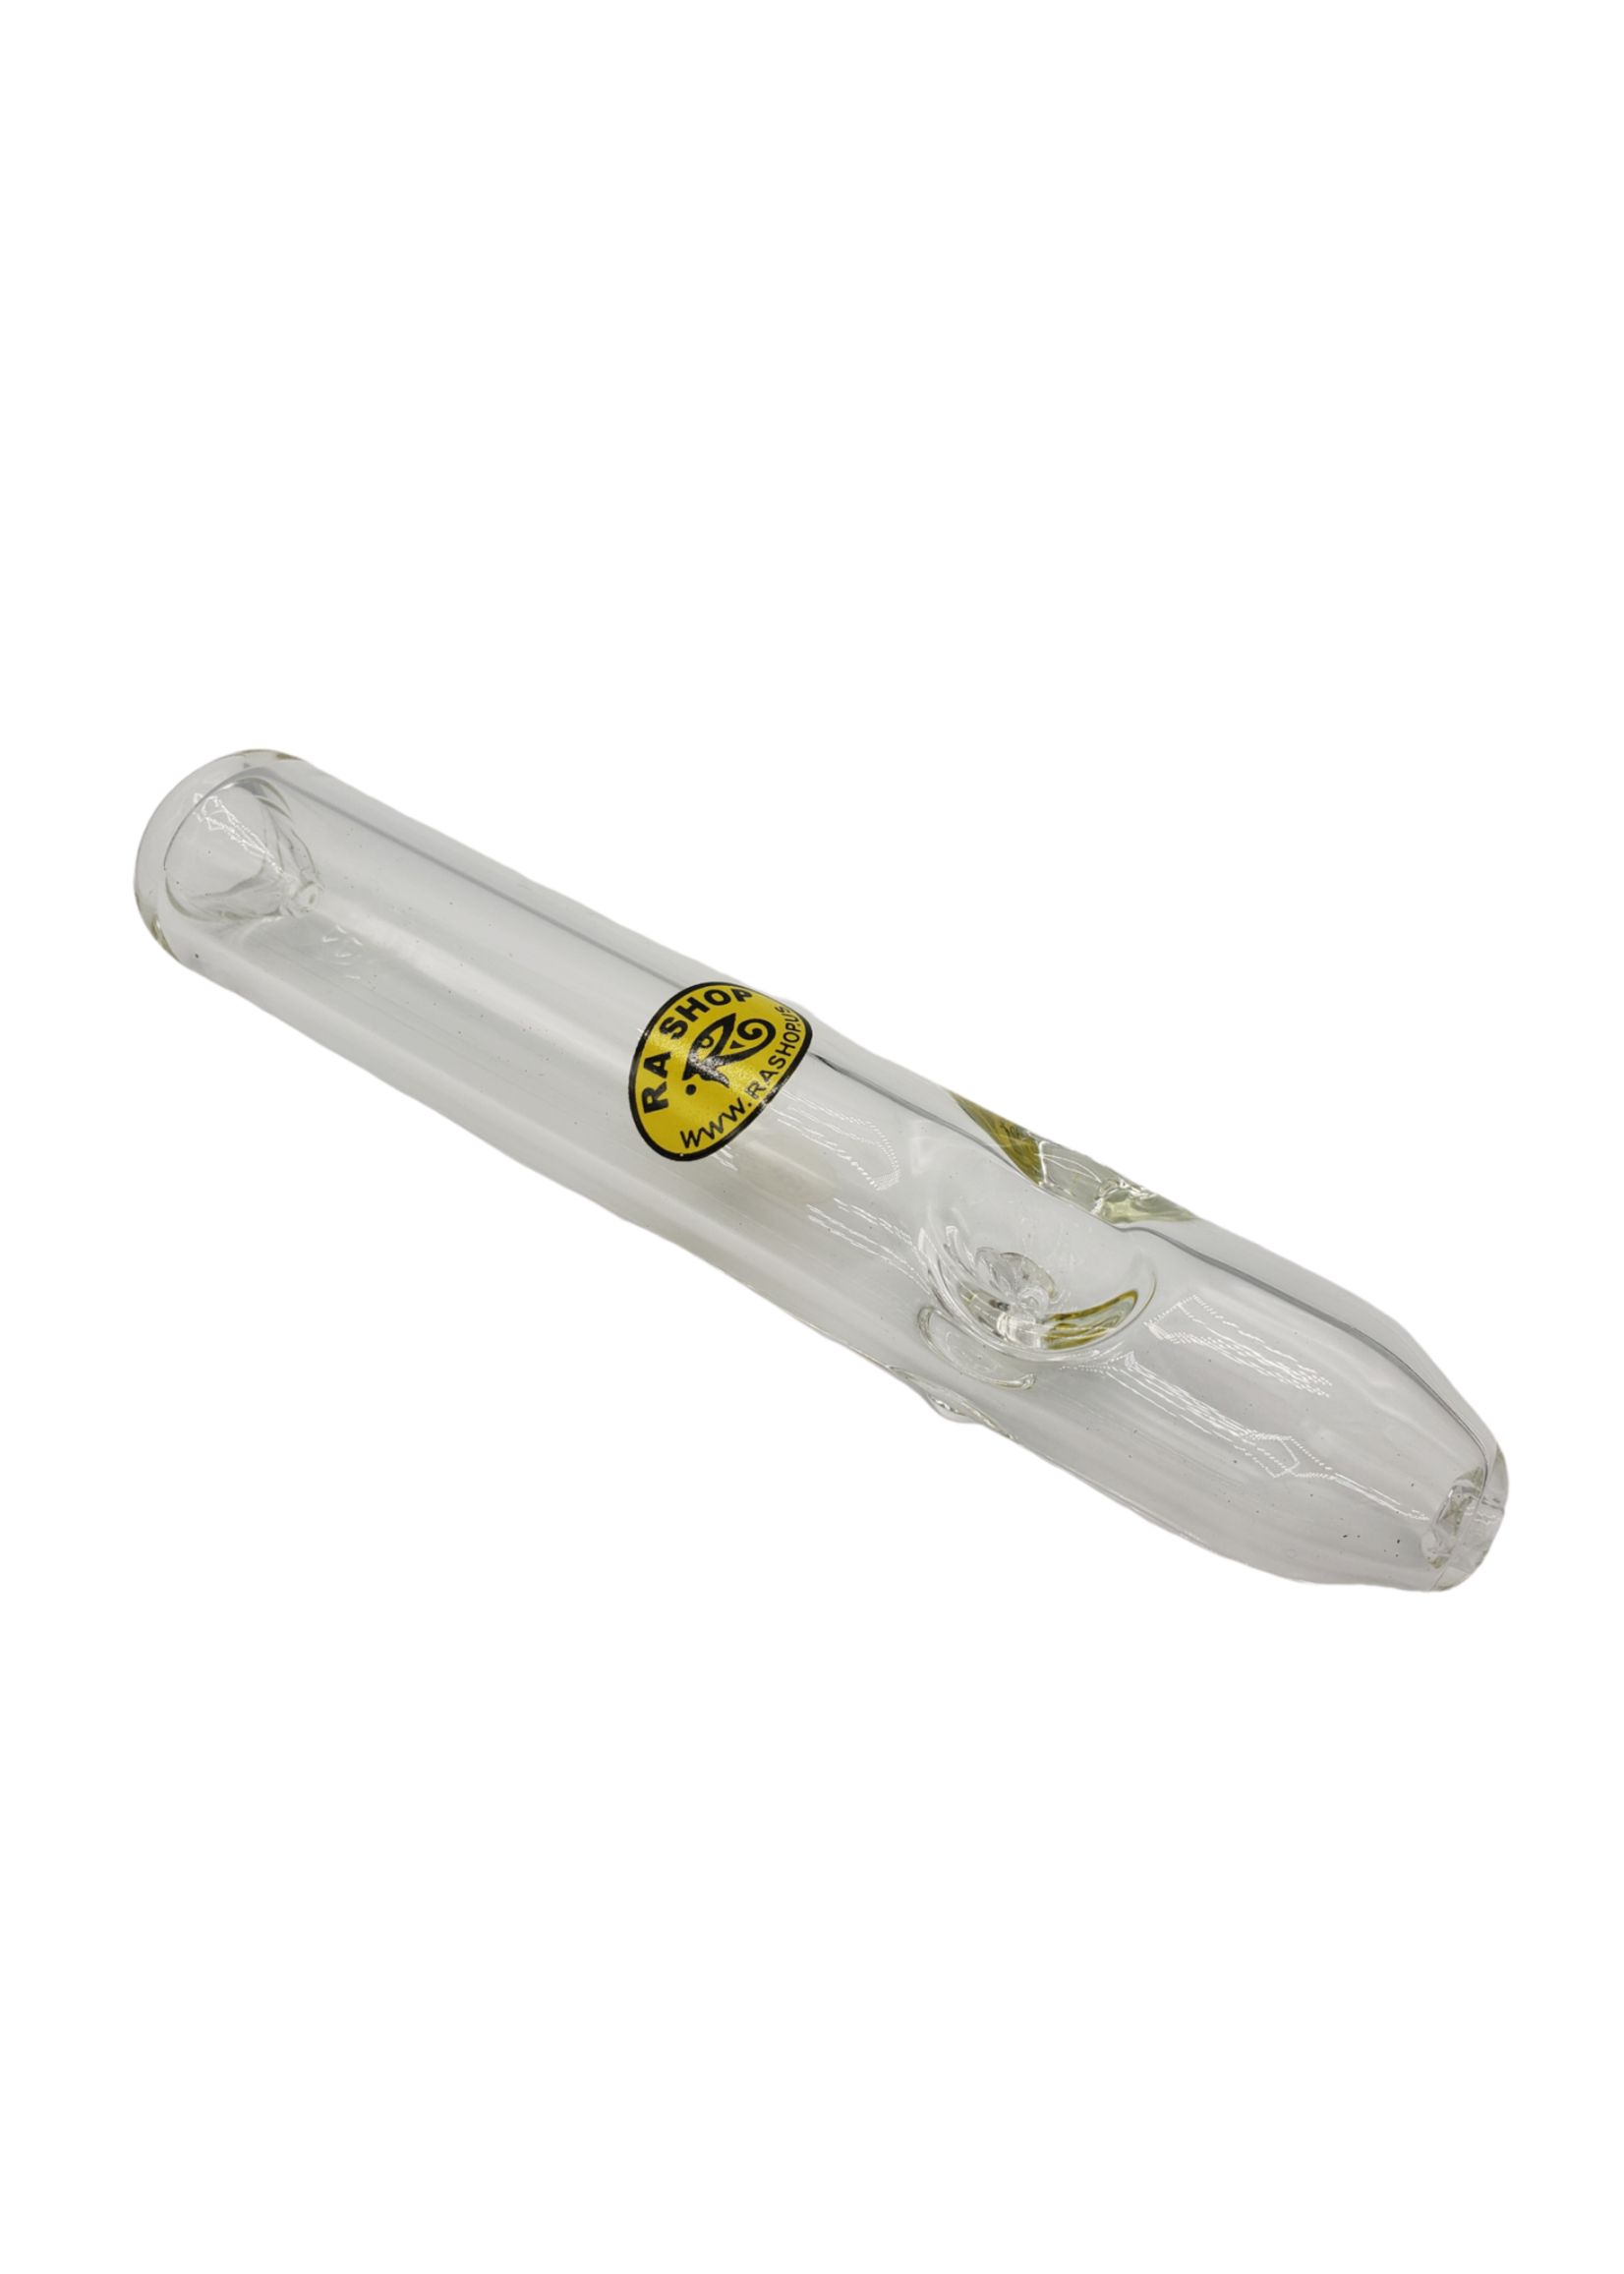 RA SHOP Clear Steamroller with Push Mouth